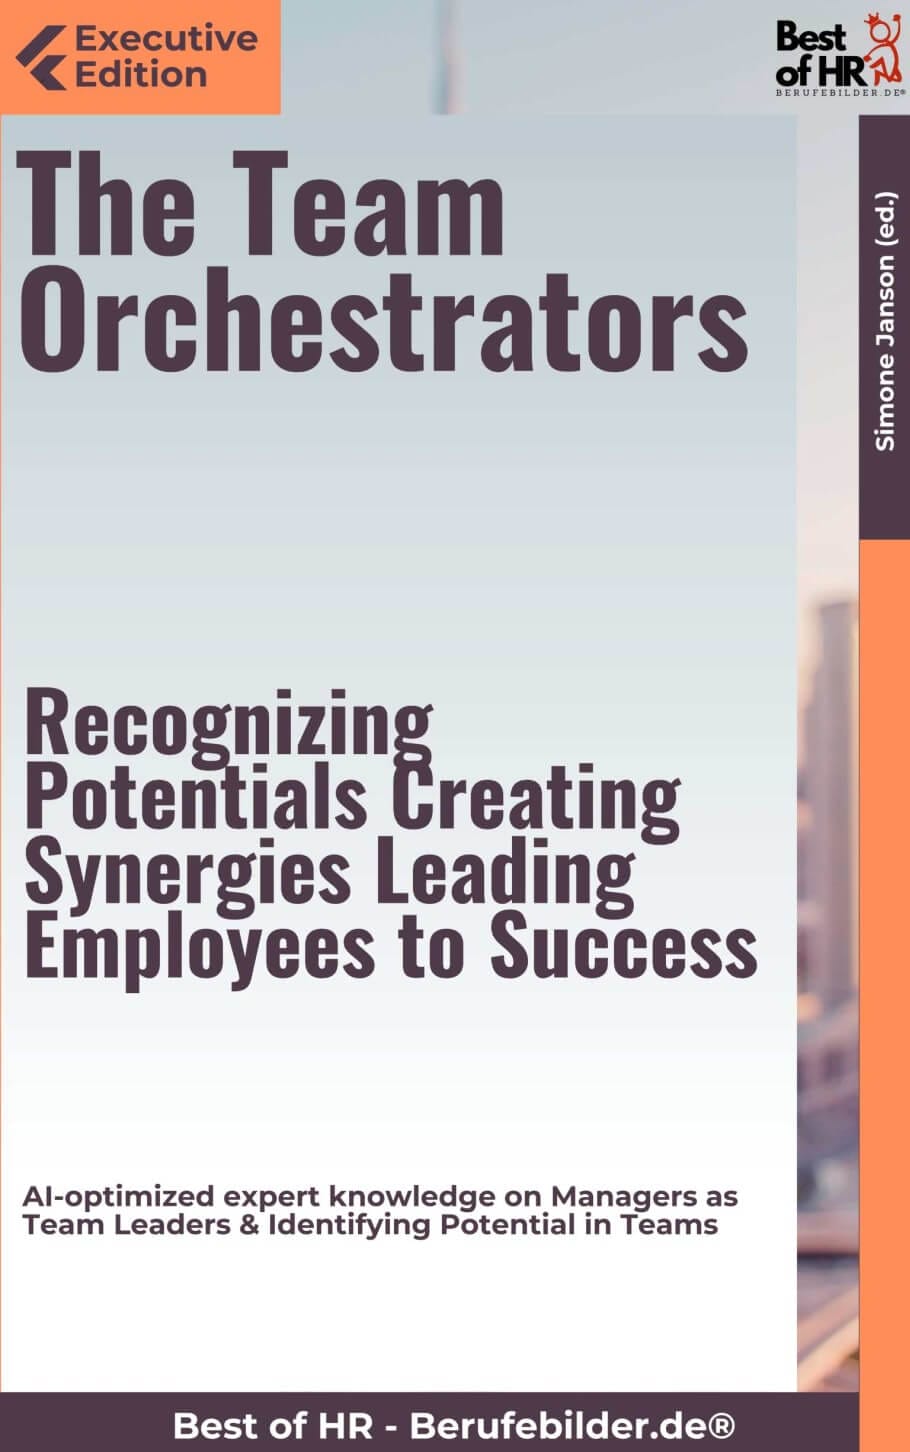 The Team Orchestrators – Recognizing Potentials, Creating Synergies, Leading Employees to Success (Engl. Version)